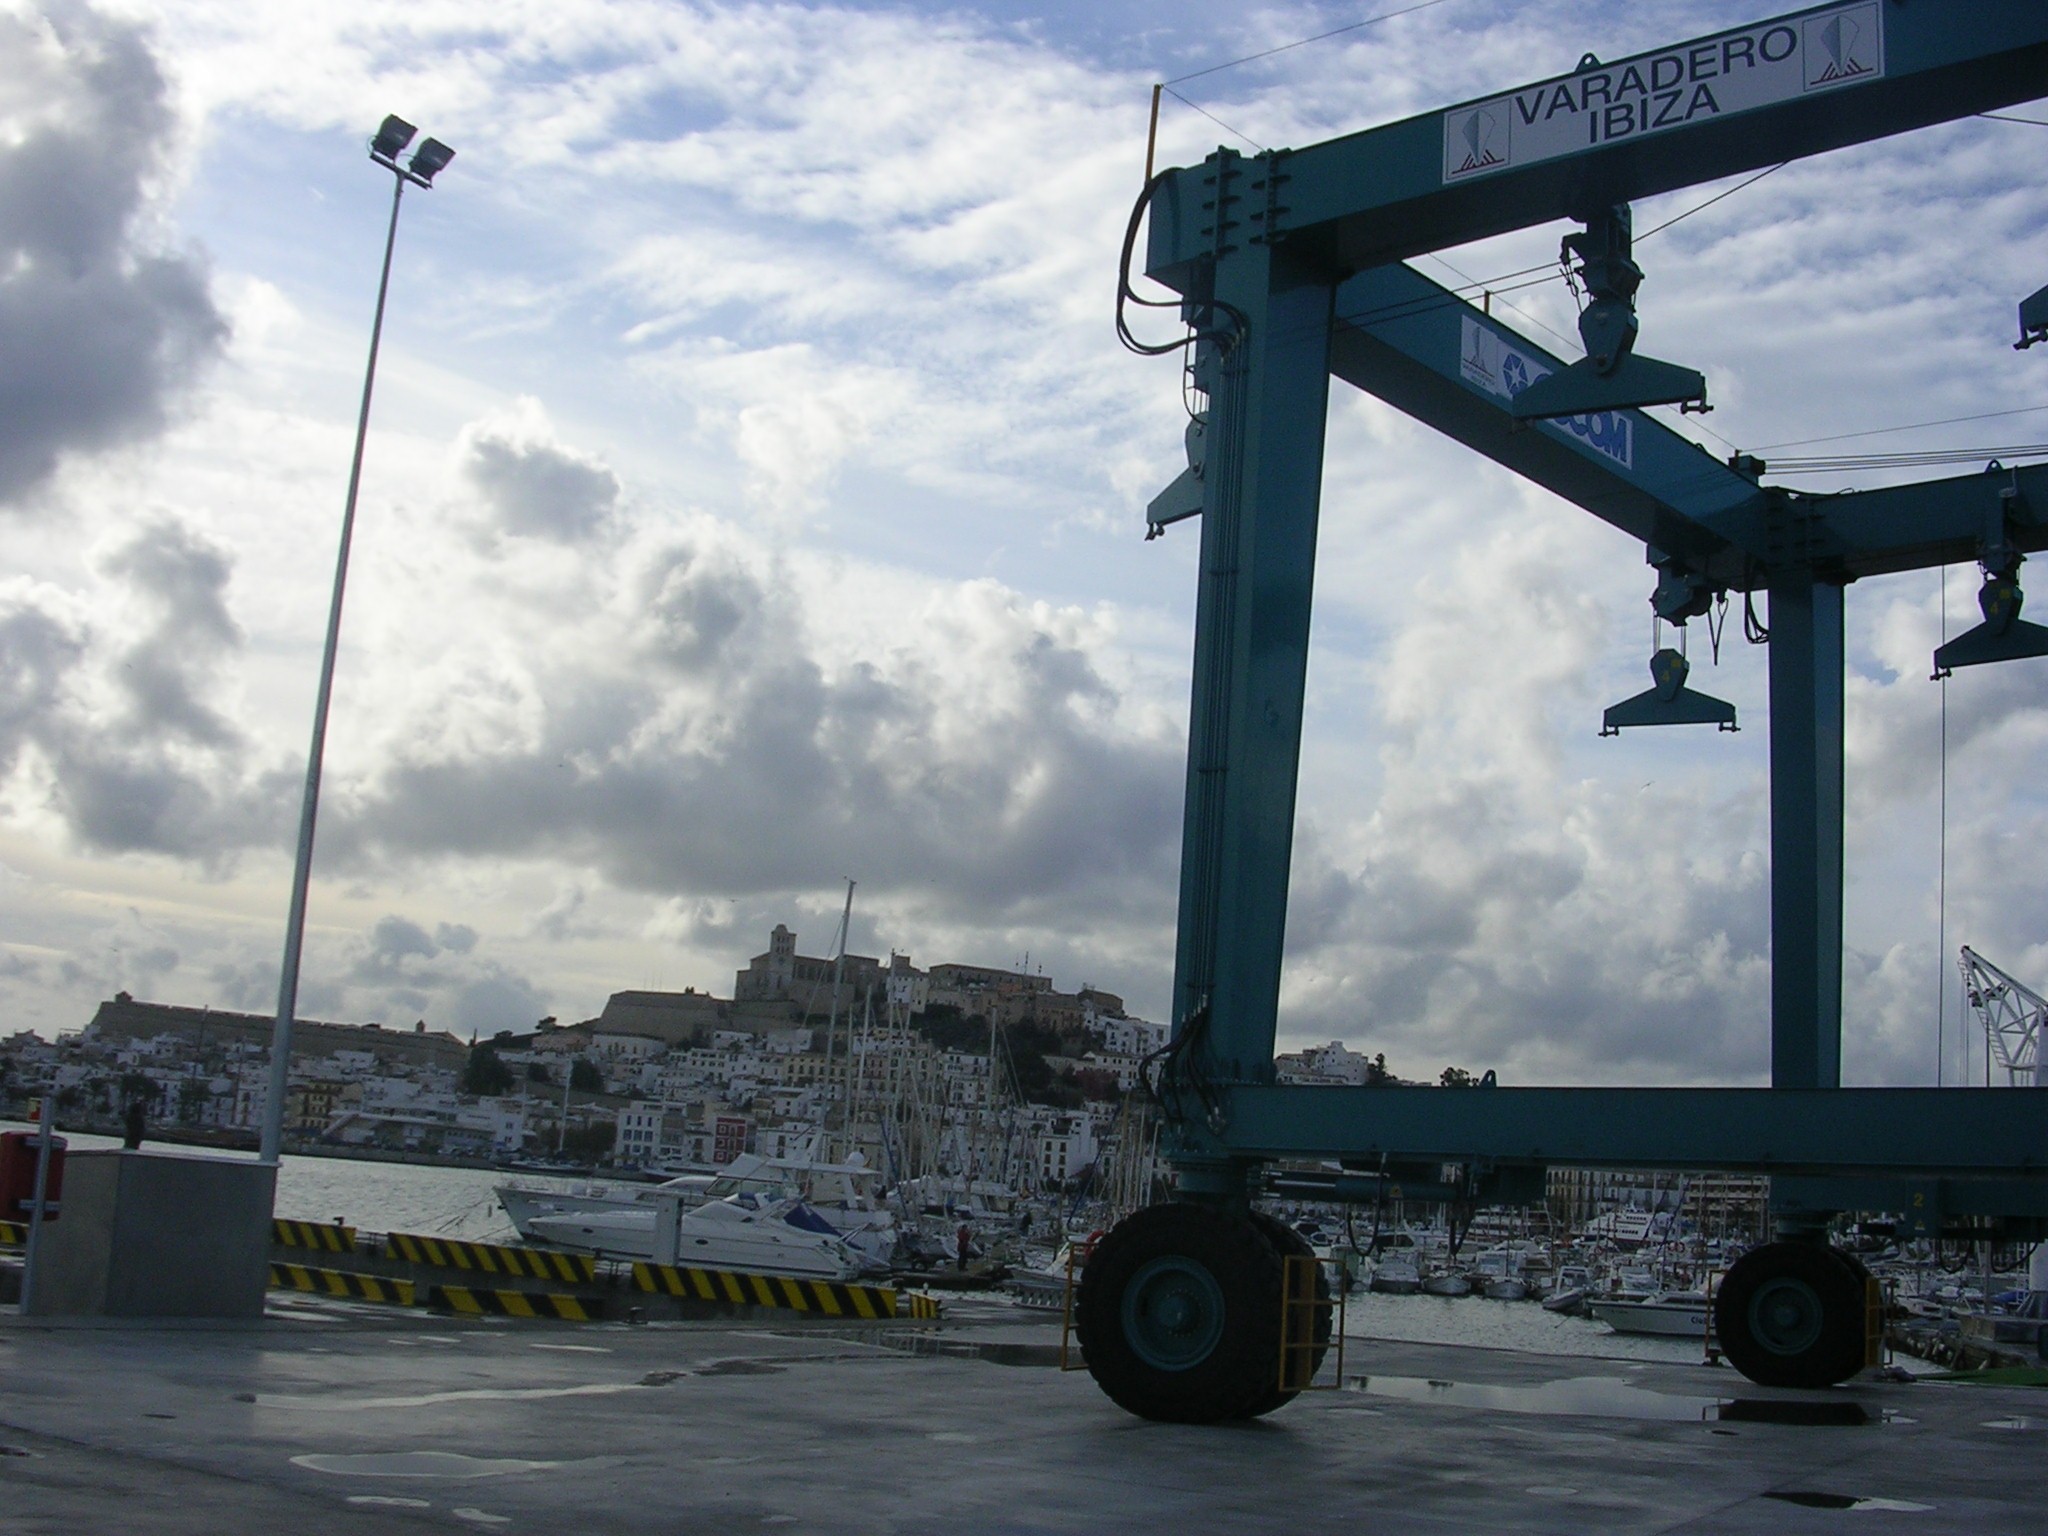 The APB is putting the shipyard adjacent to the fishing quay in the port of Ibiza out to tender for four years